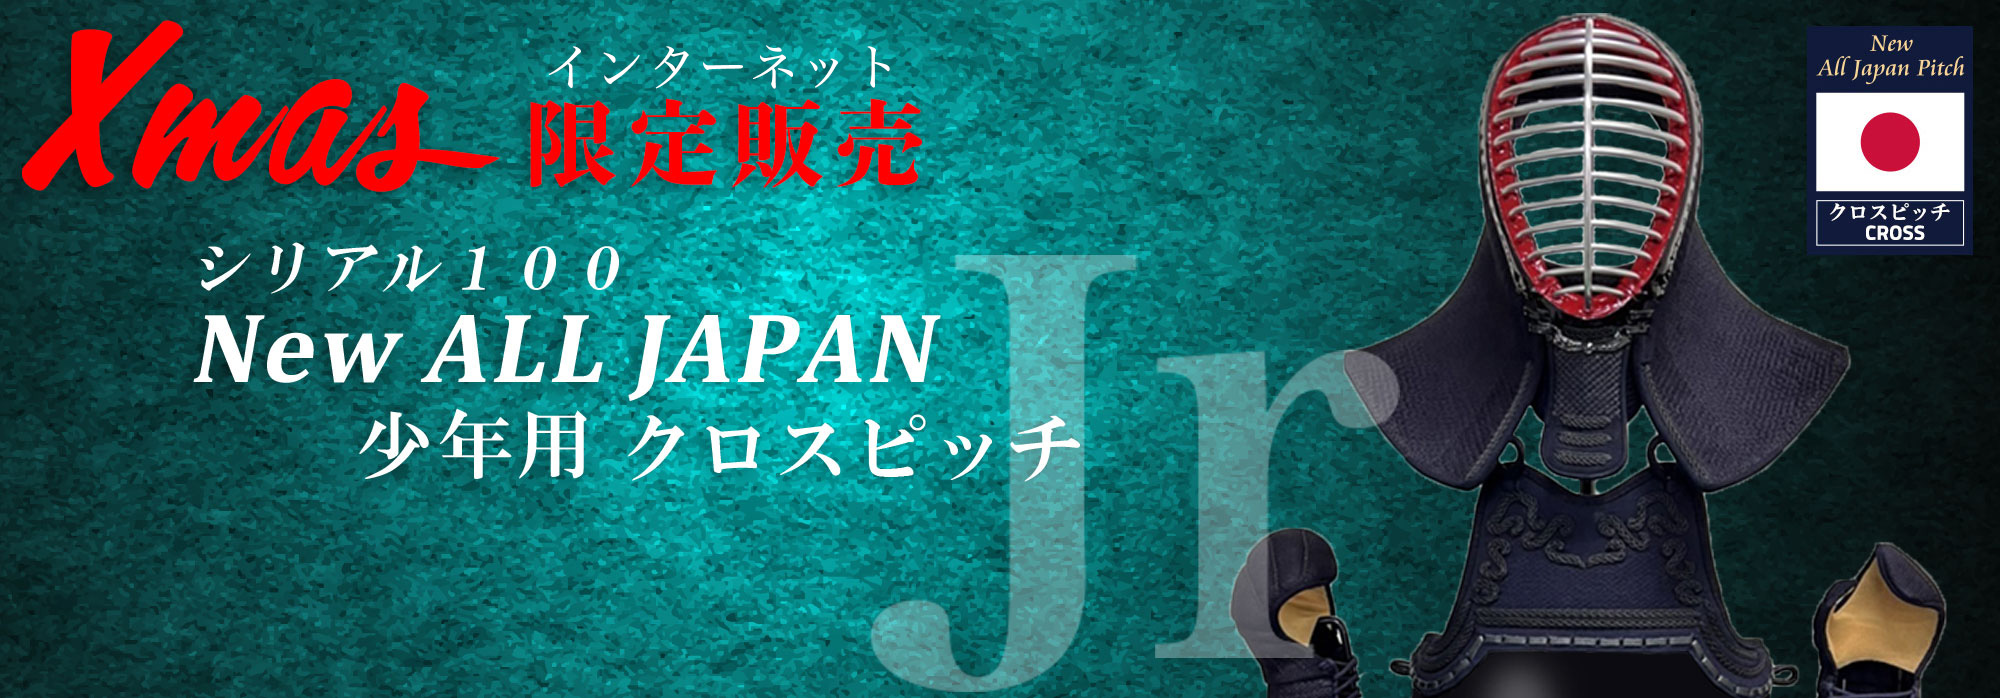 New ALL JAPAN PITCH Jr